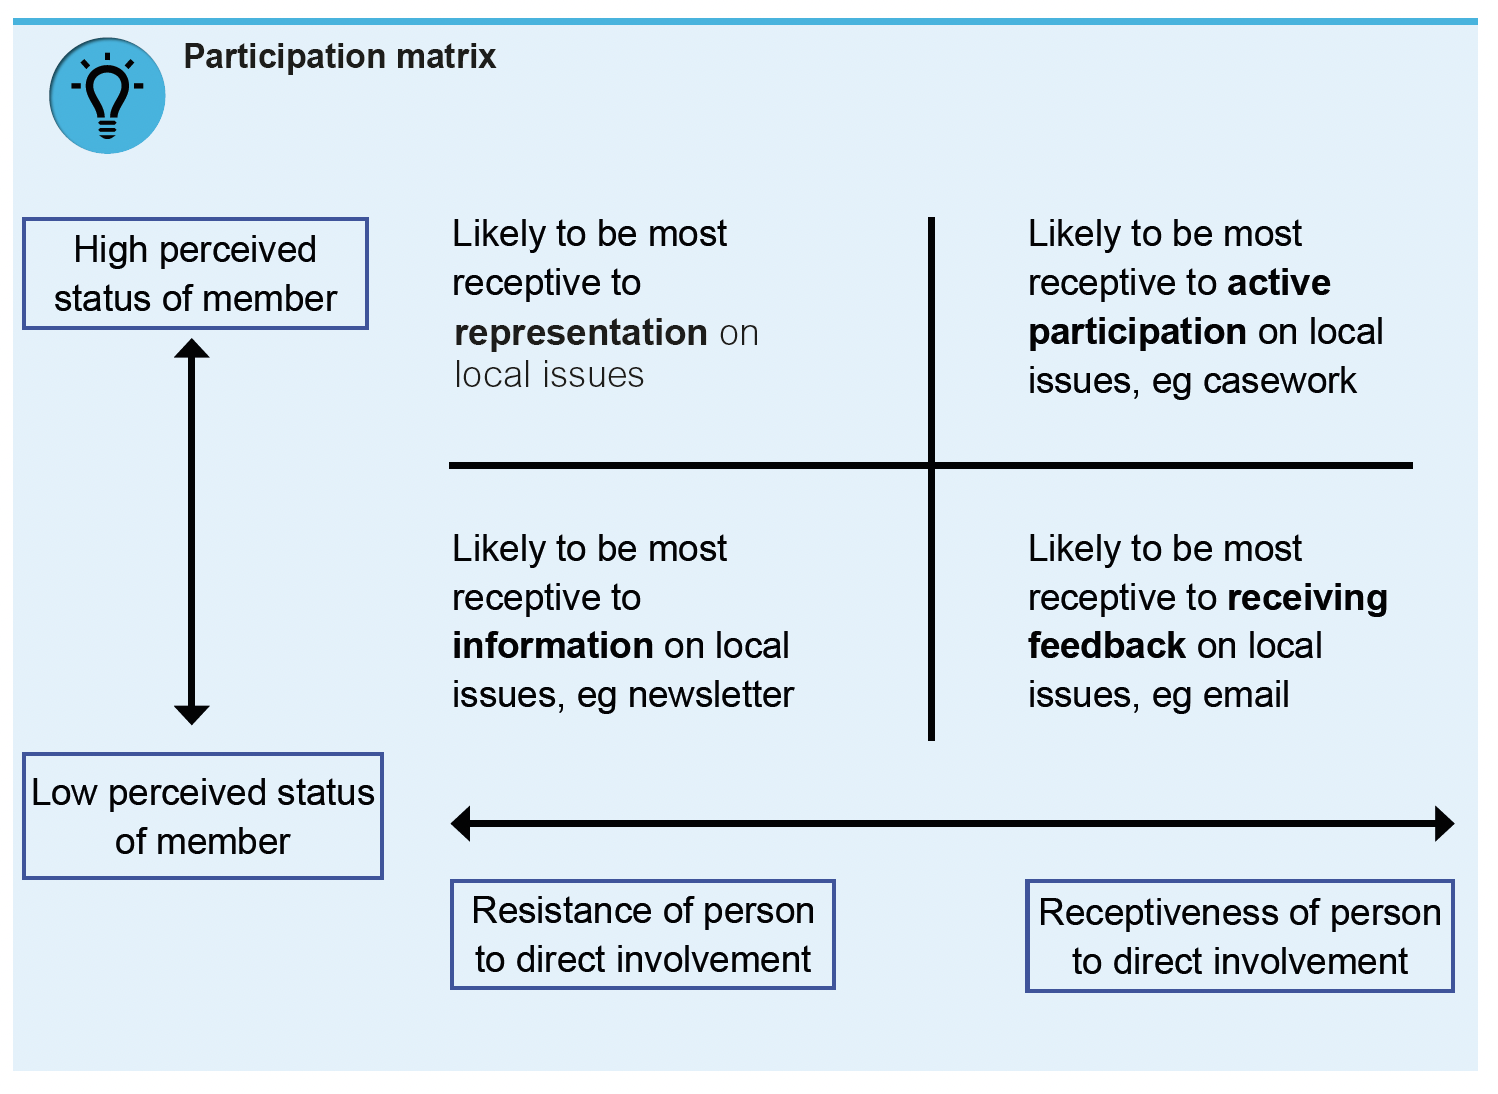 Participation matrix below shows levels of participation that residents like.